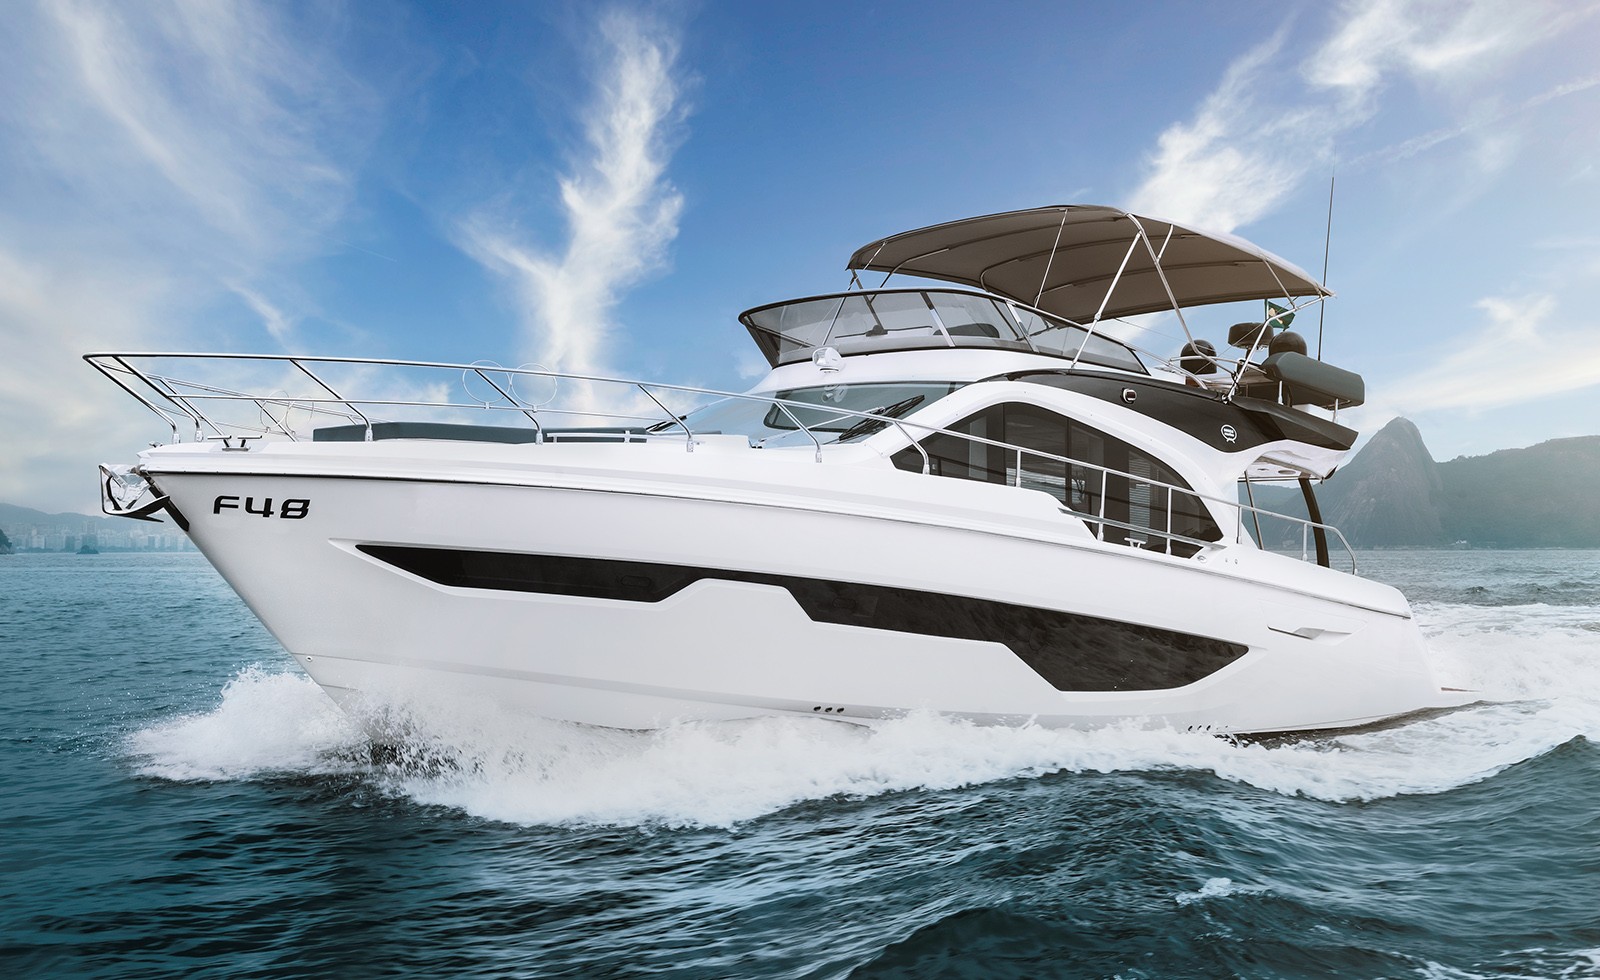 Sessa Marine Introduces the new F48 to the European Market